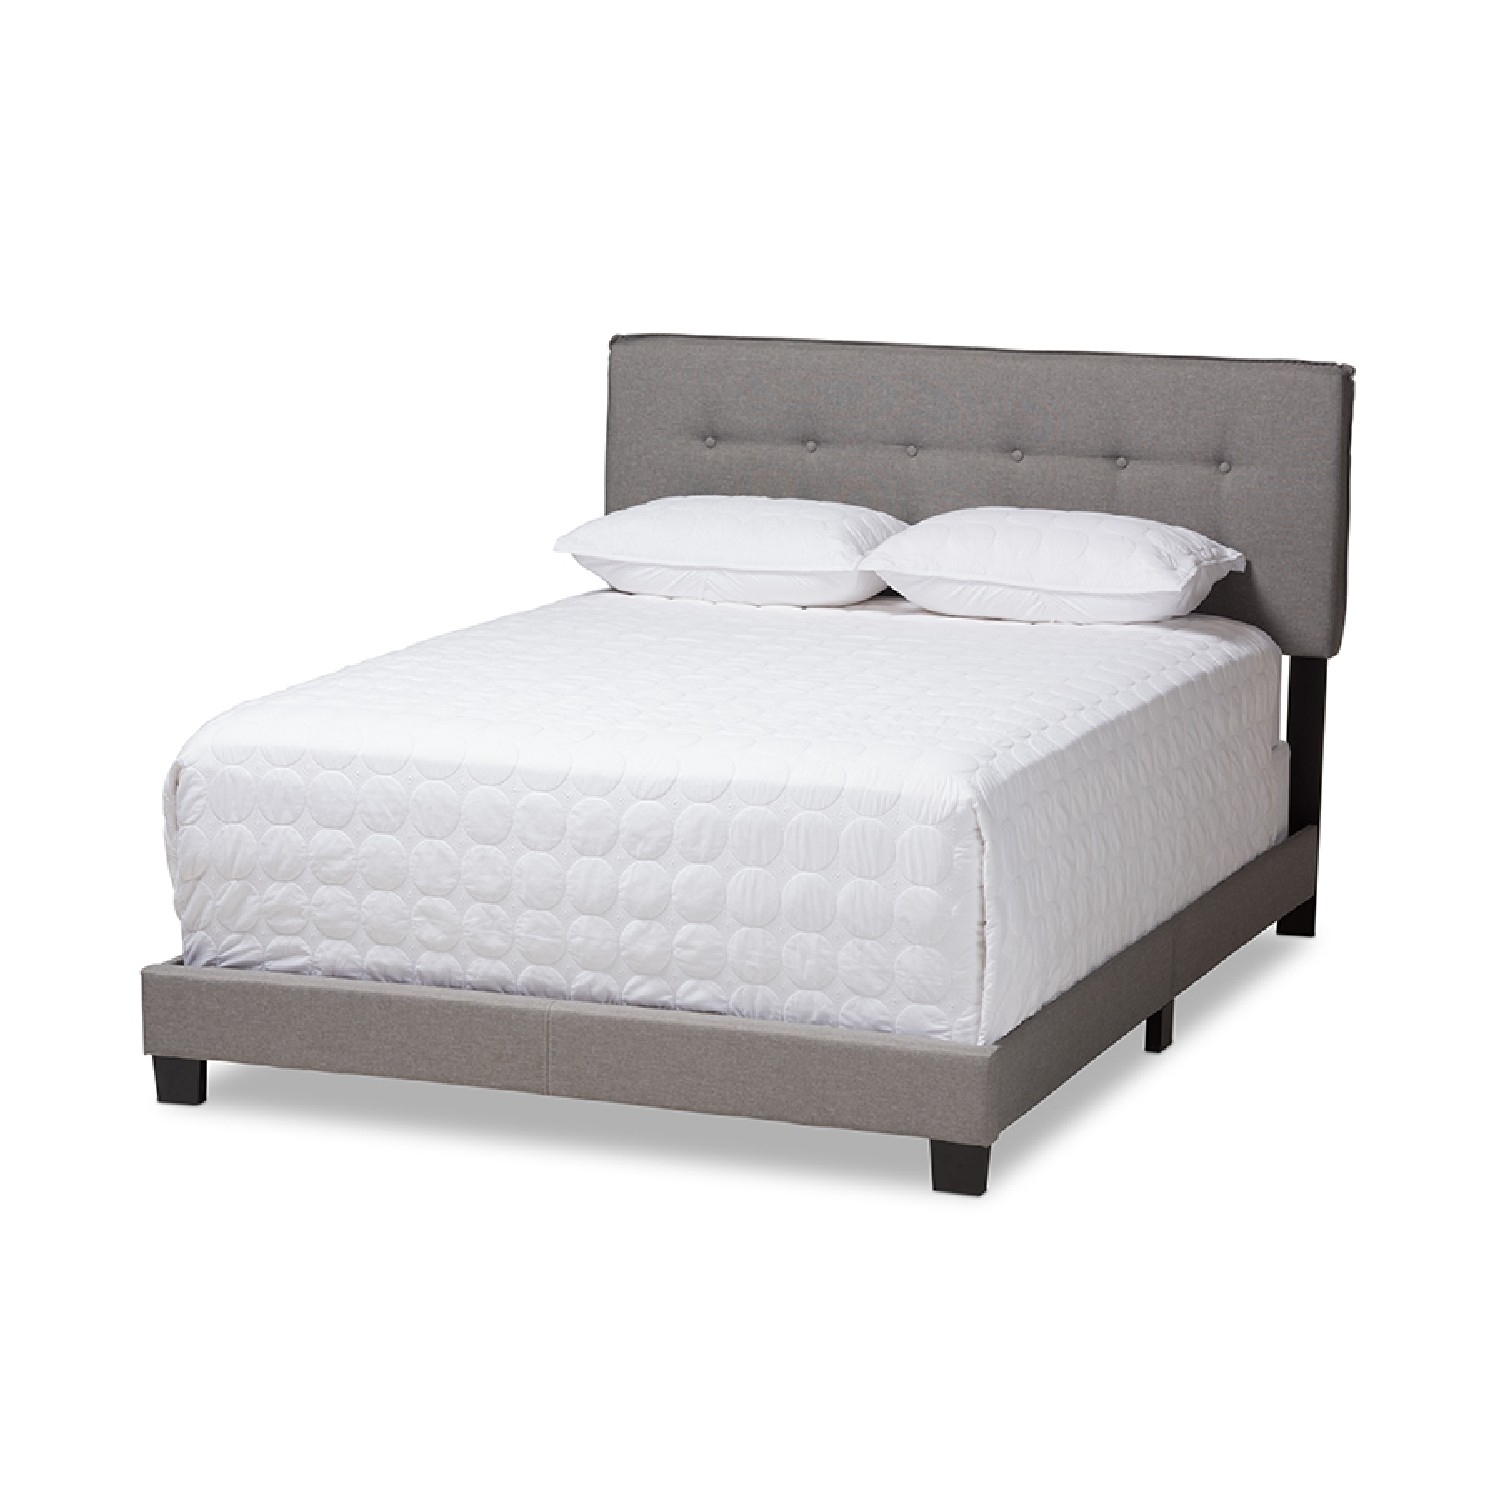 Baxton Studio Audrey Modern and Contemporary Upholstered Bed, Multiple Sizes, Multiple Colors - image 1 of 7